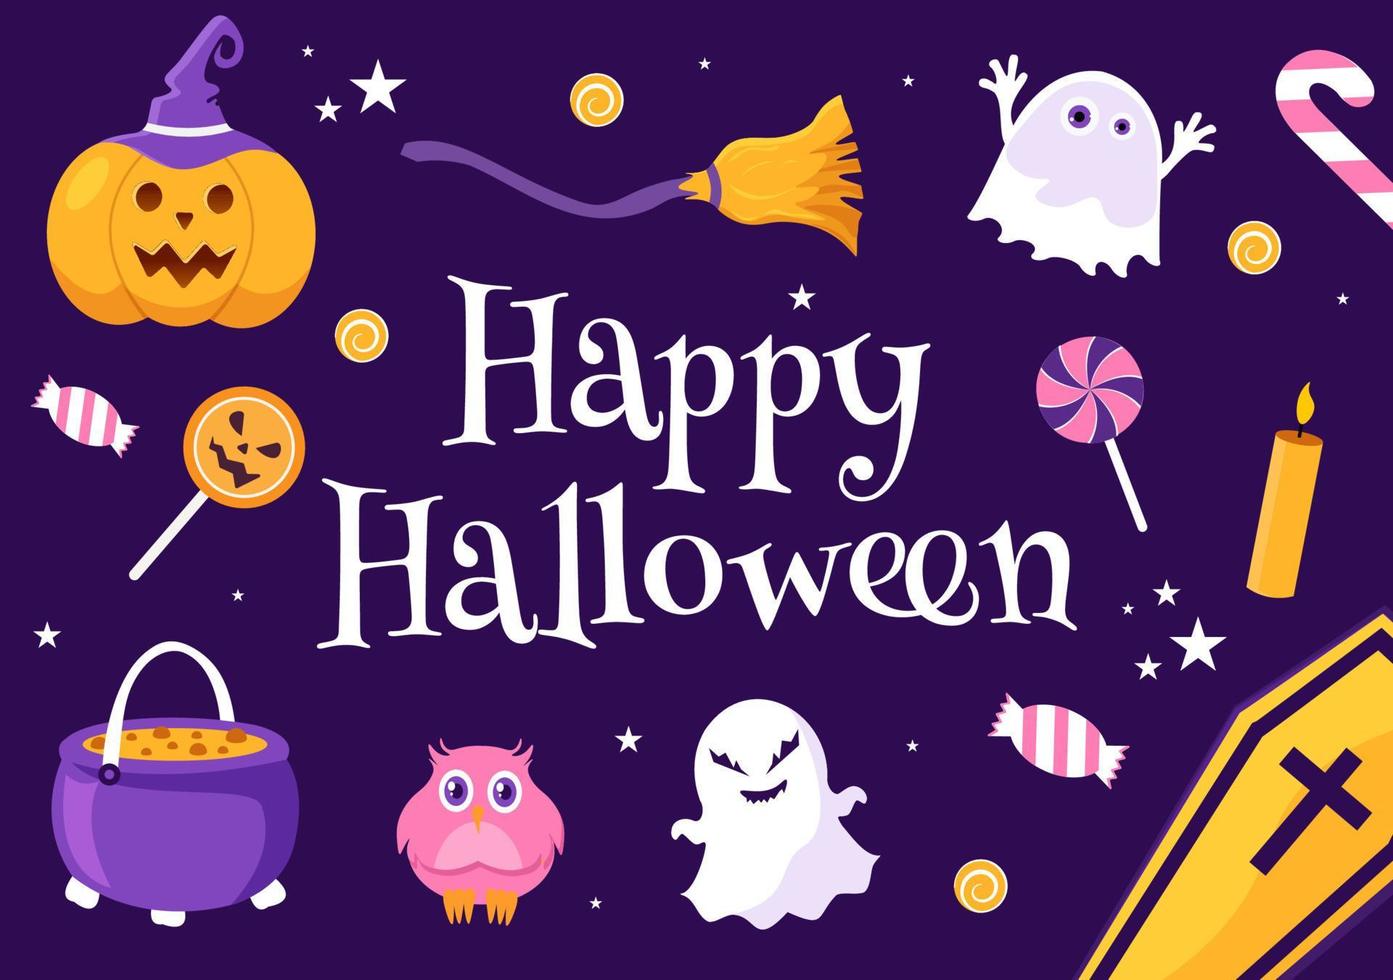 Happy Halloween Template Background Hand Drawn Cartoon Flat Illustration with Pumpkins, Bats and Dark Castle on Full Moon For Add Your Design Style vector